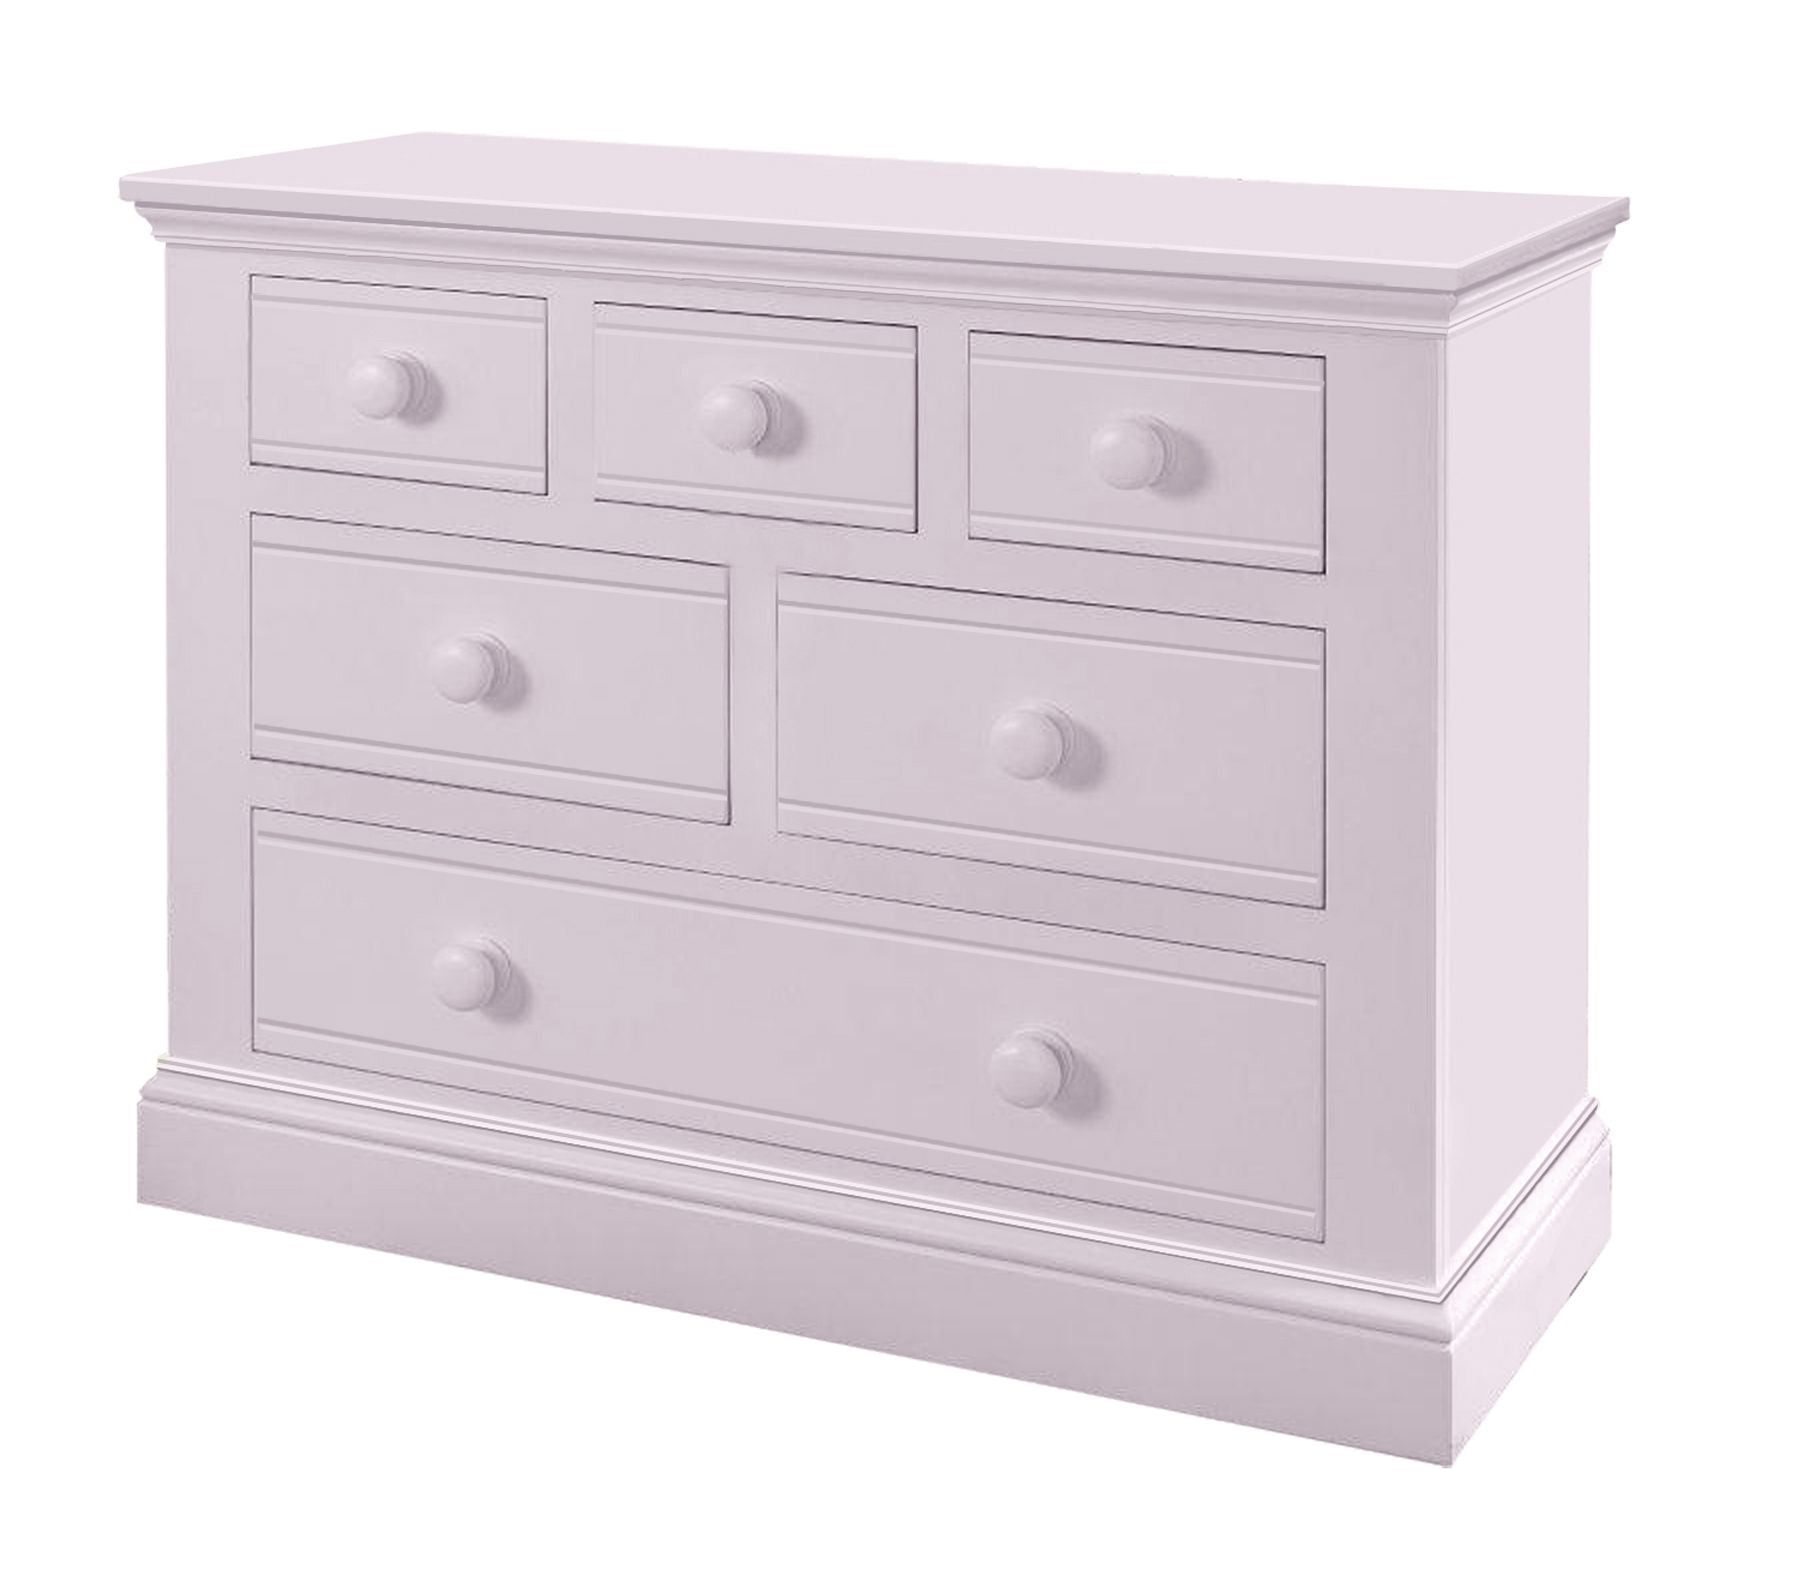 New Hampton 6 Drawer Chest - Candy Floss